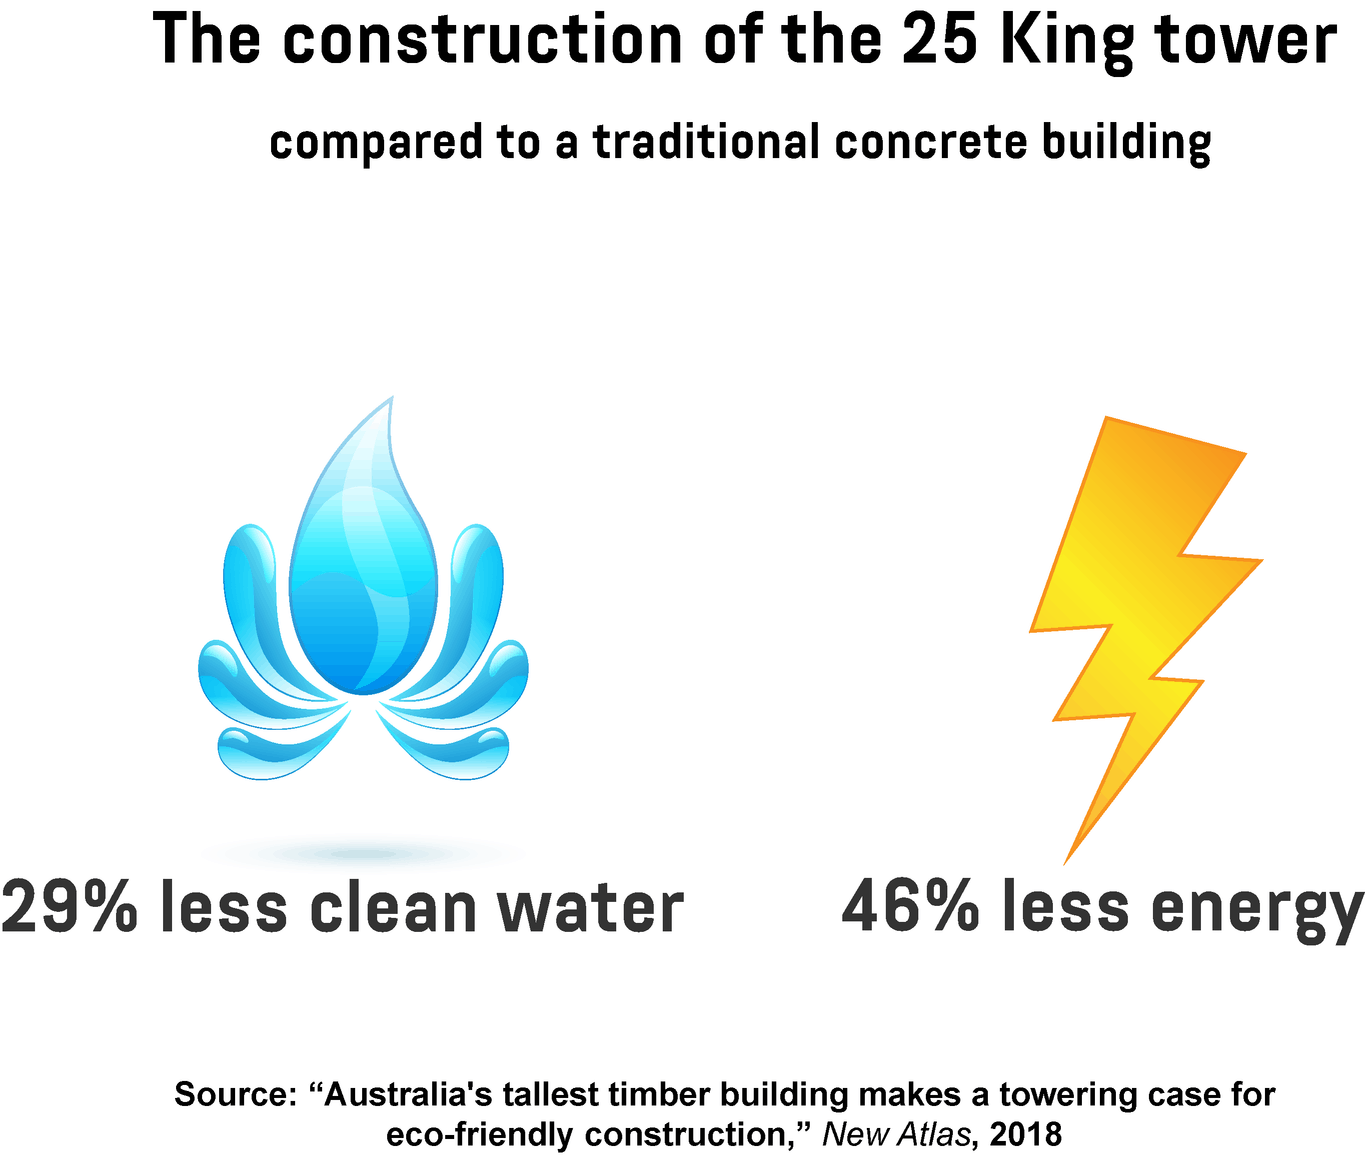 An infographic showing the benefits of the timber-based construction used on the 25 King tower, compared to a traditional concrete building.